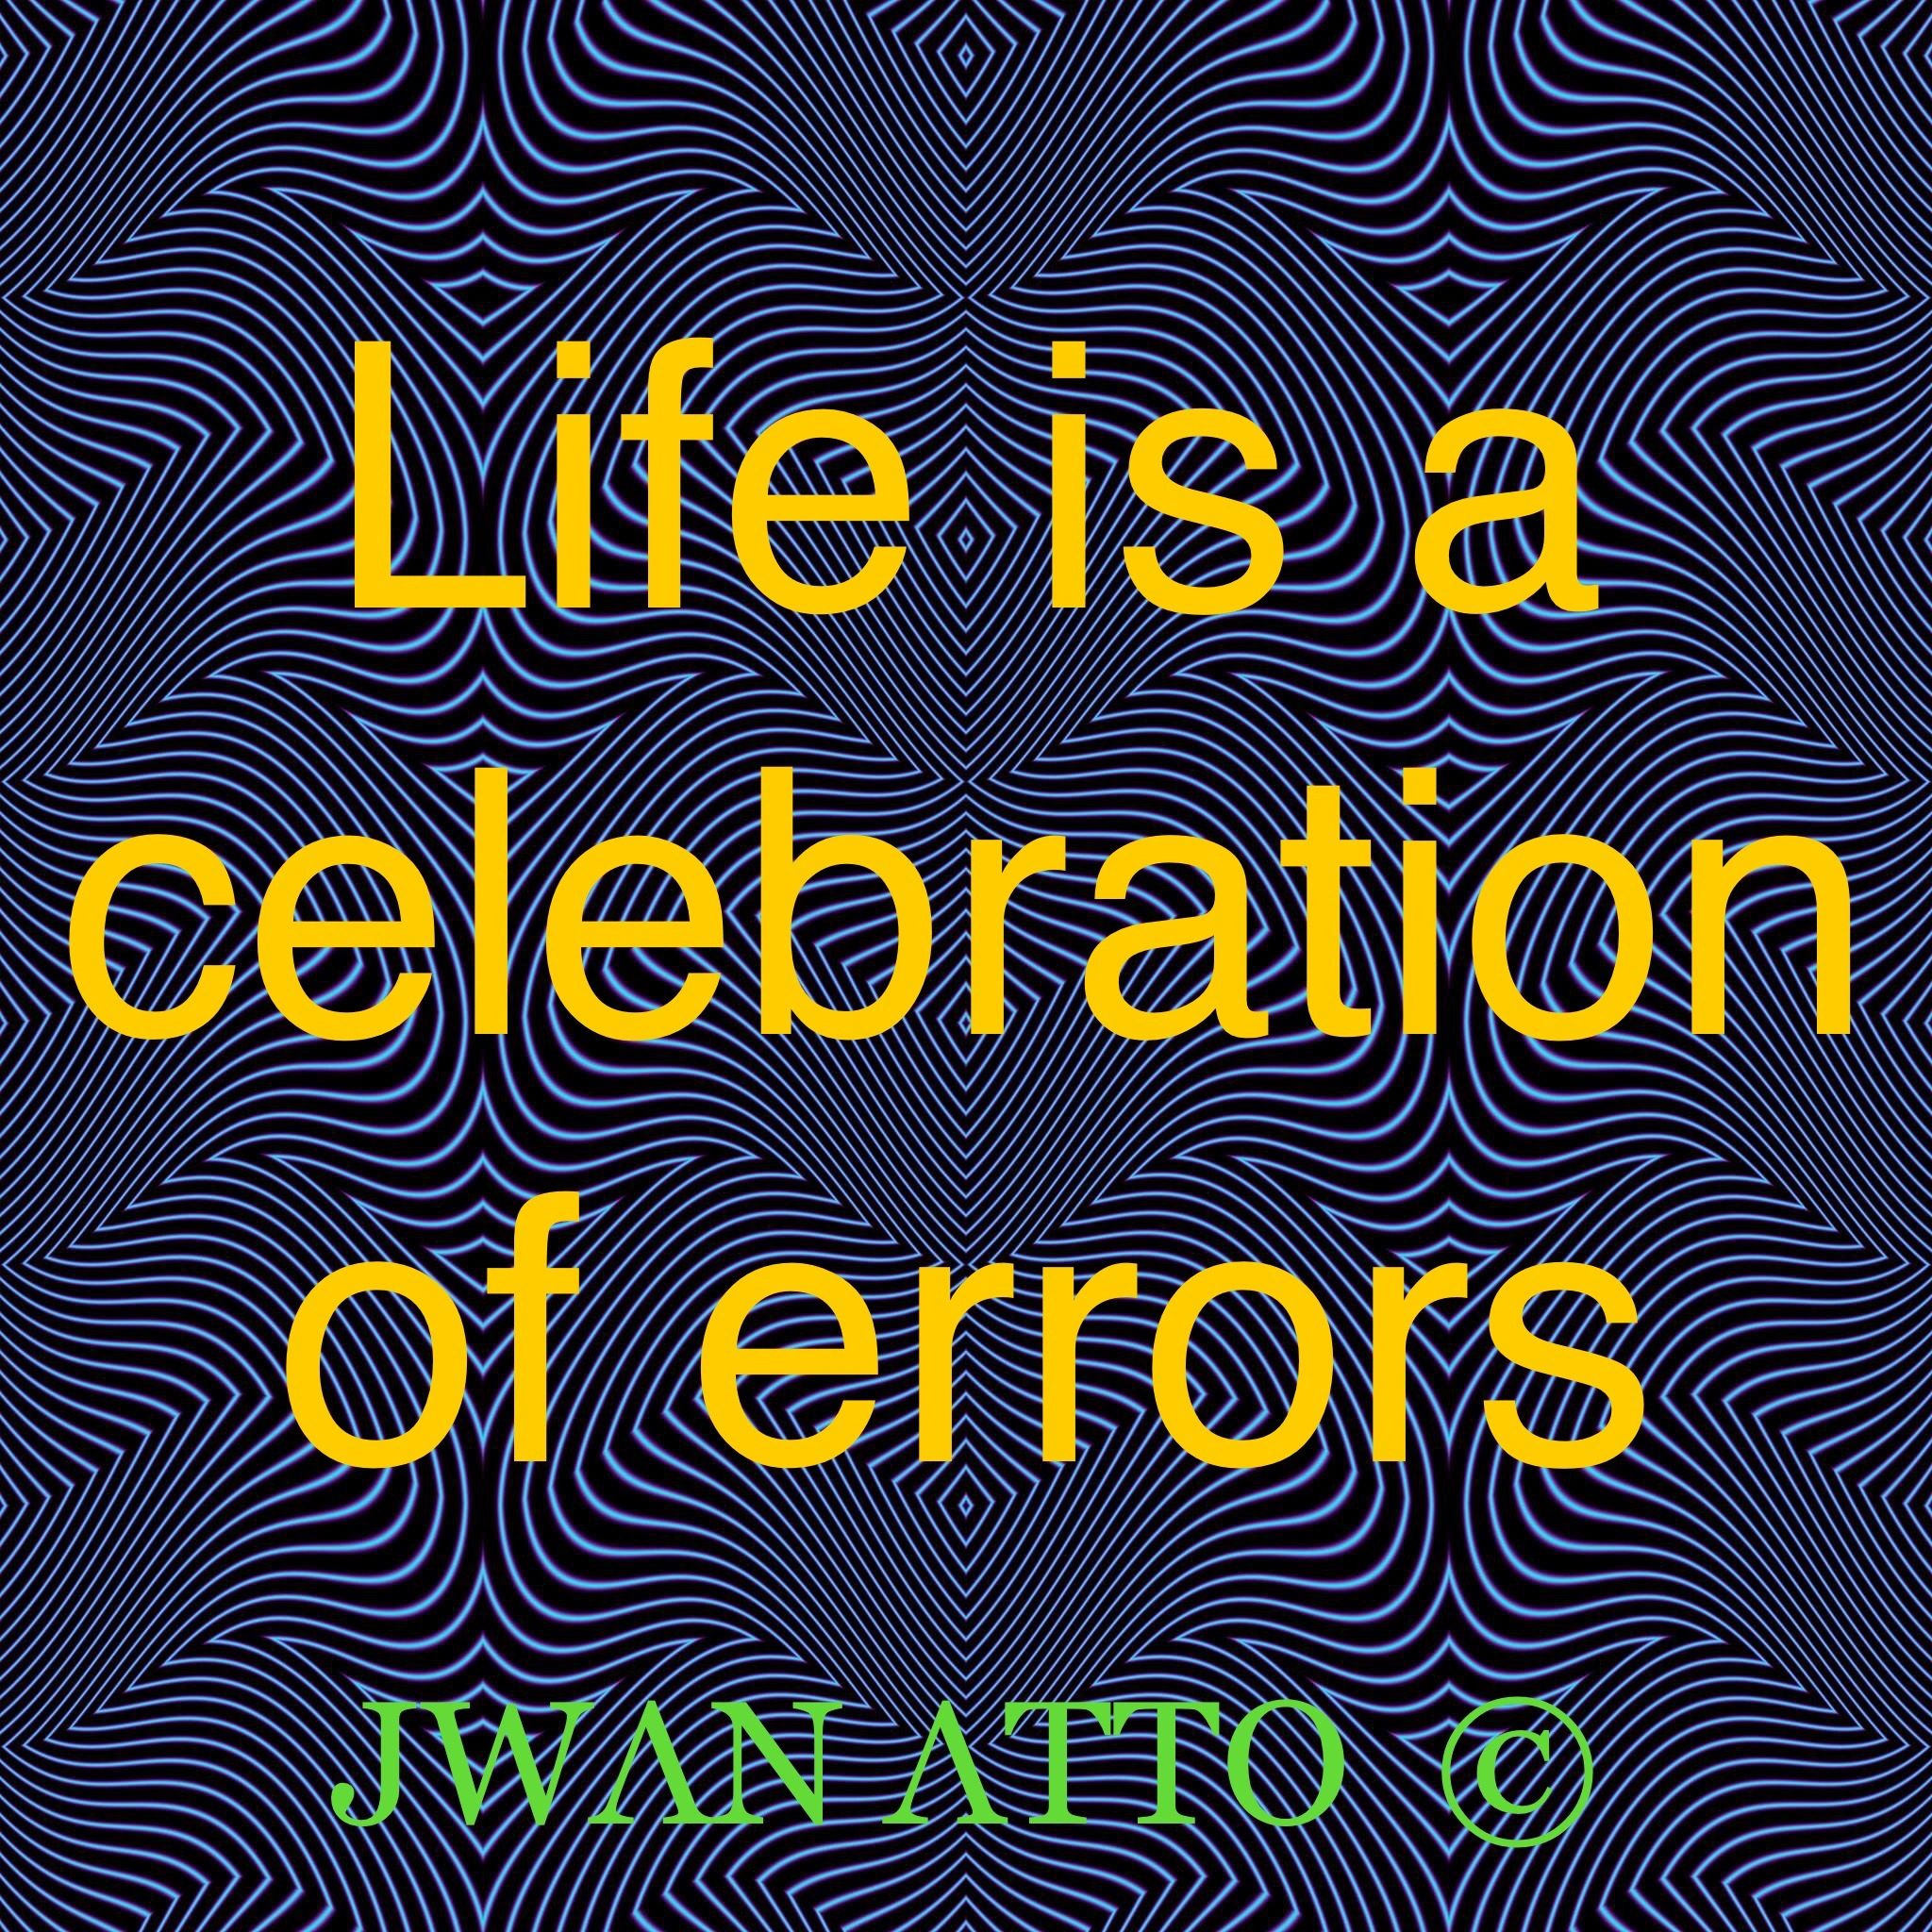 quote about errors